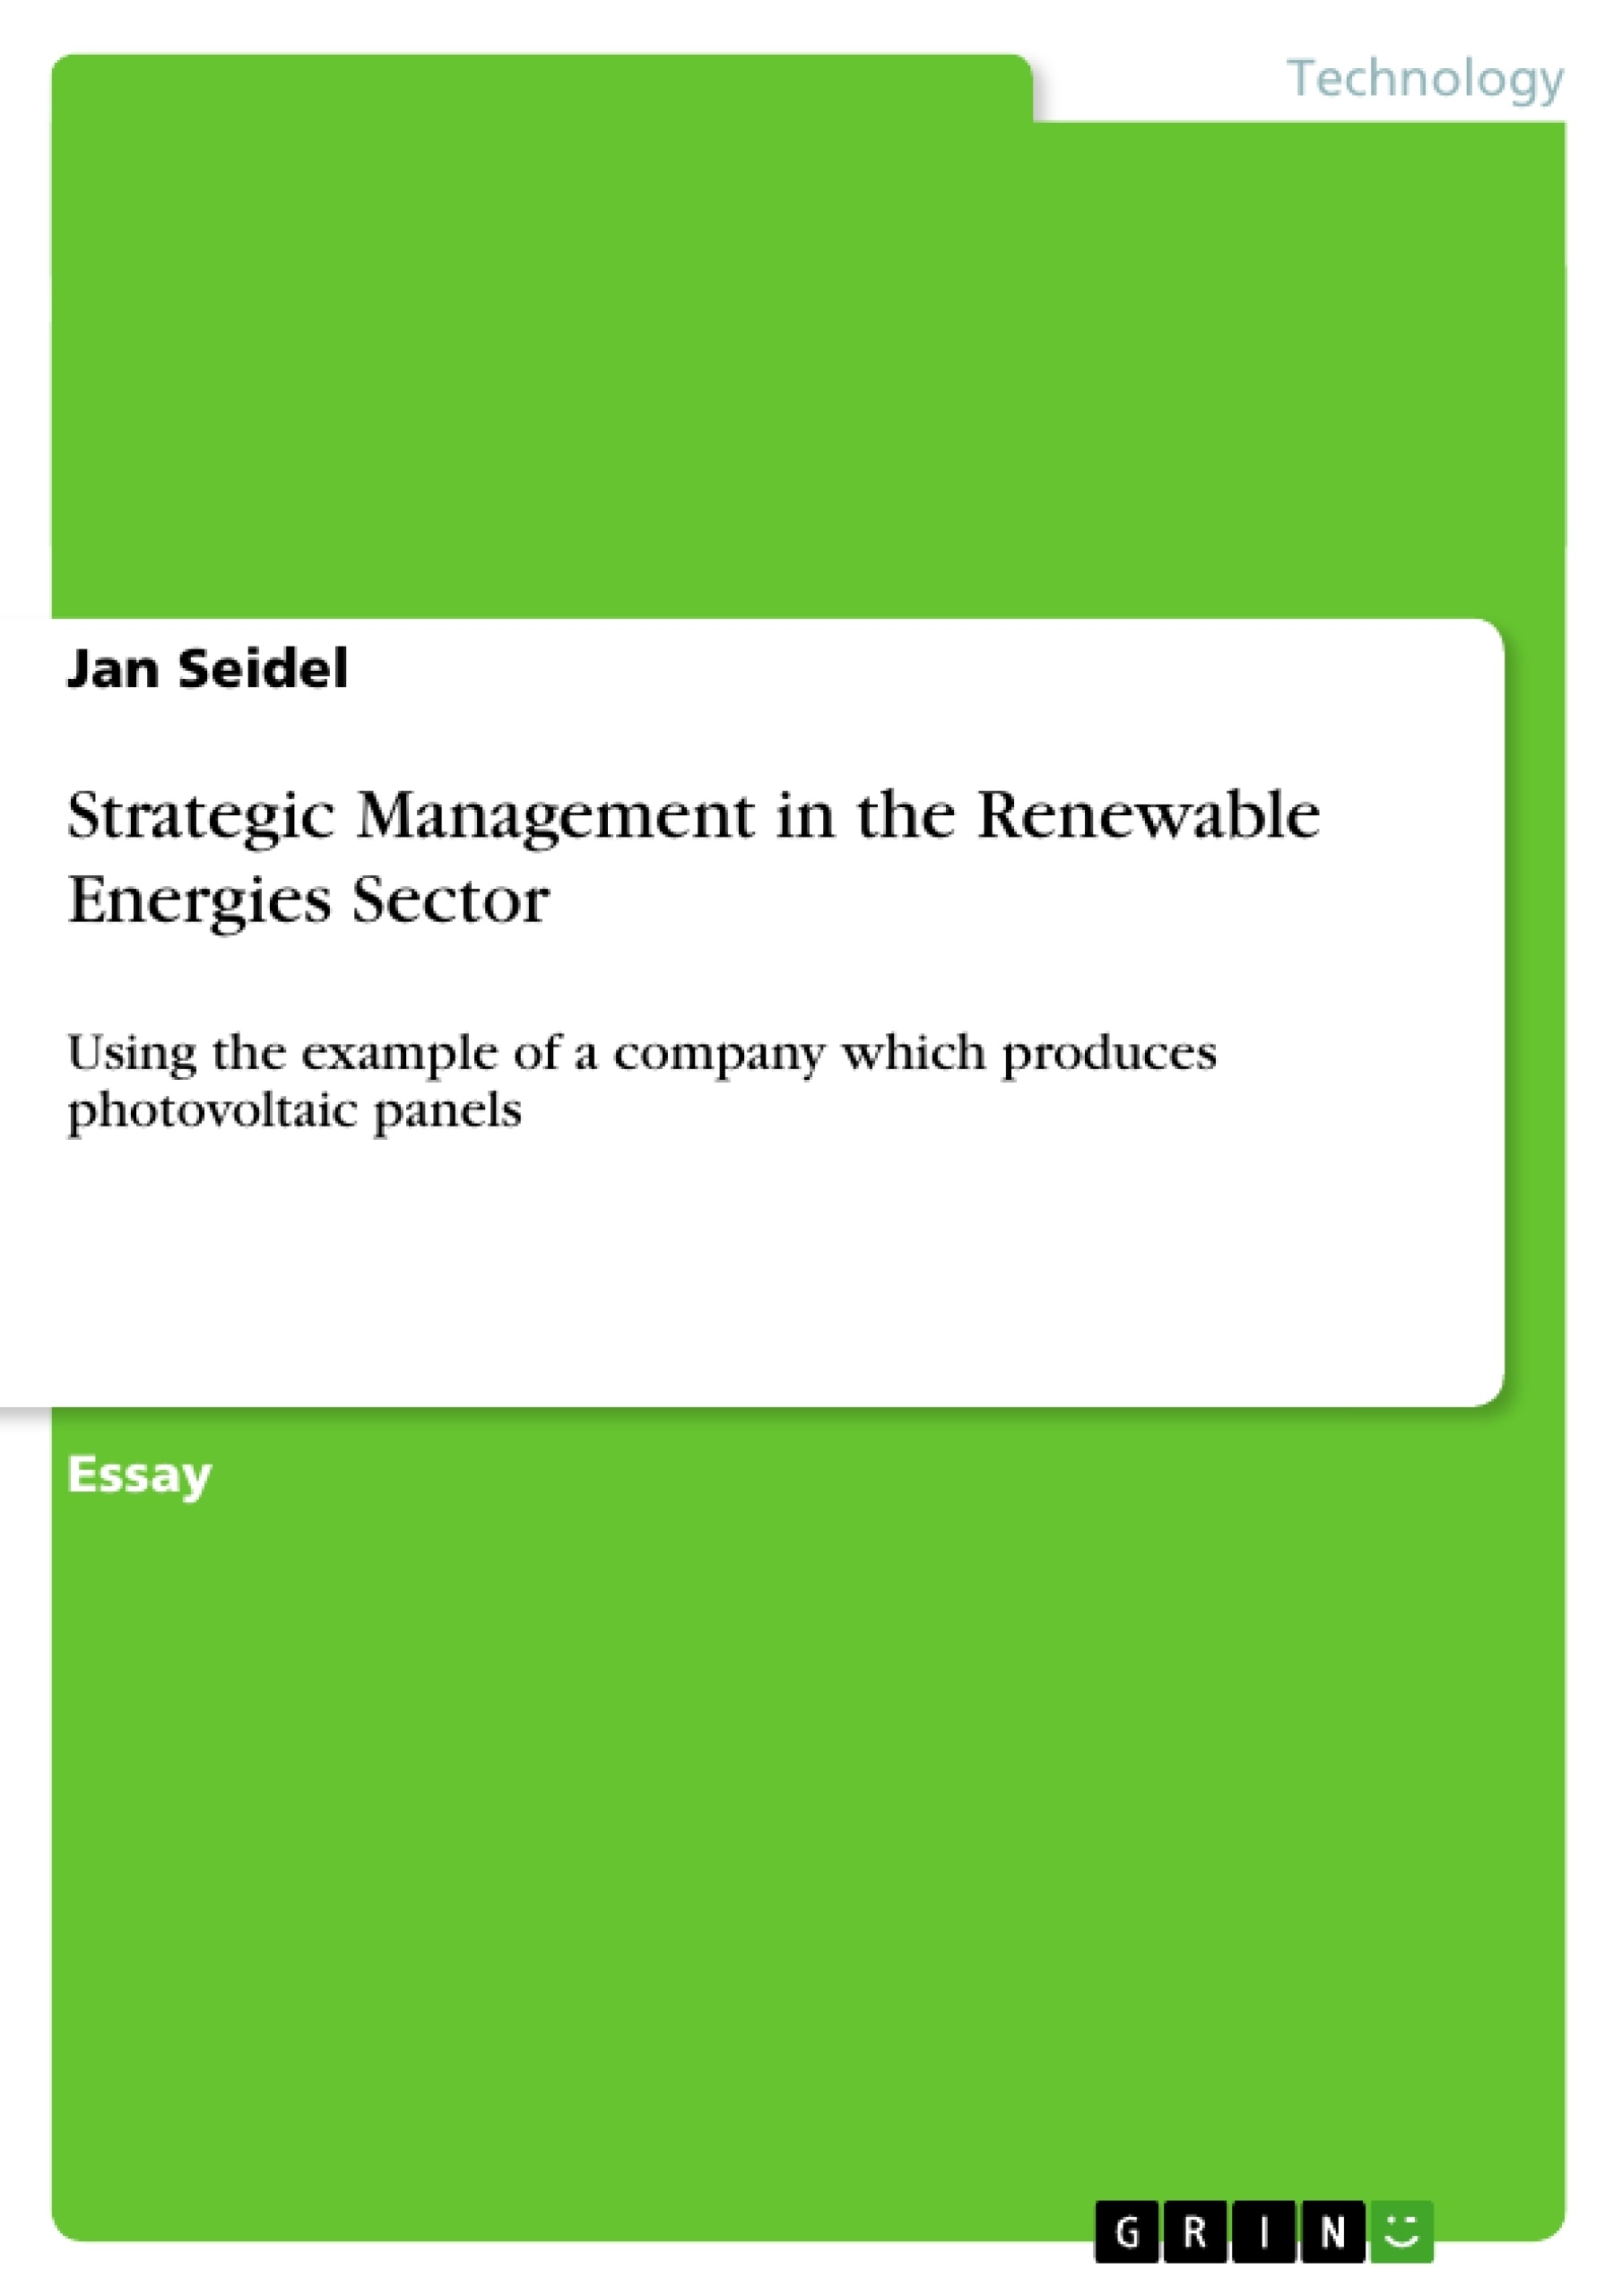 Title: Strategic Management in the Renewable Energies Sector